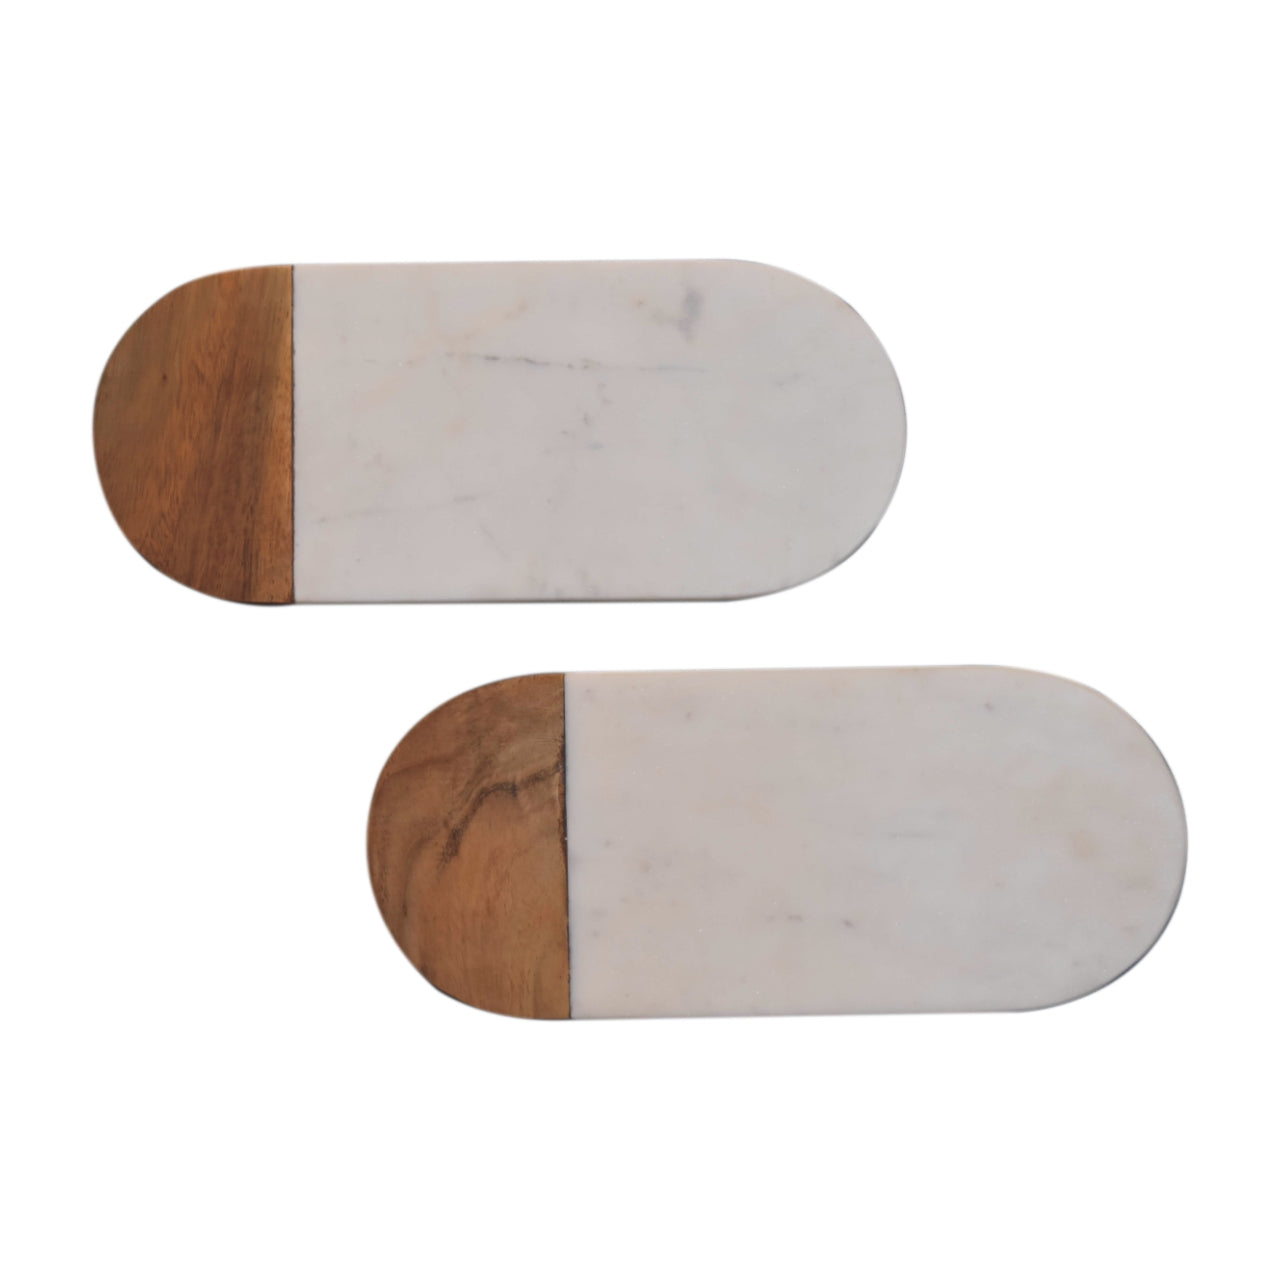 View White Marble and Wood Chopping Board information